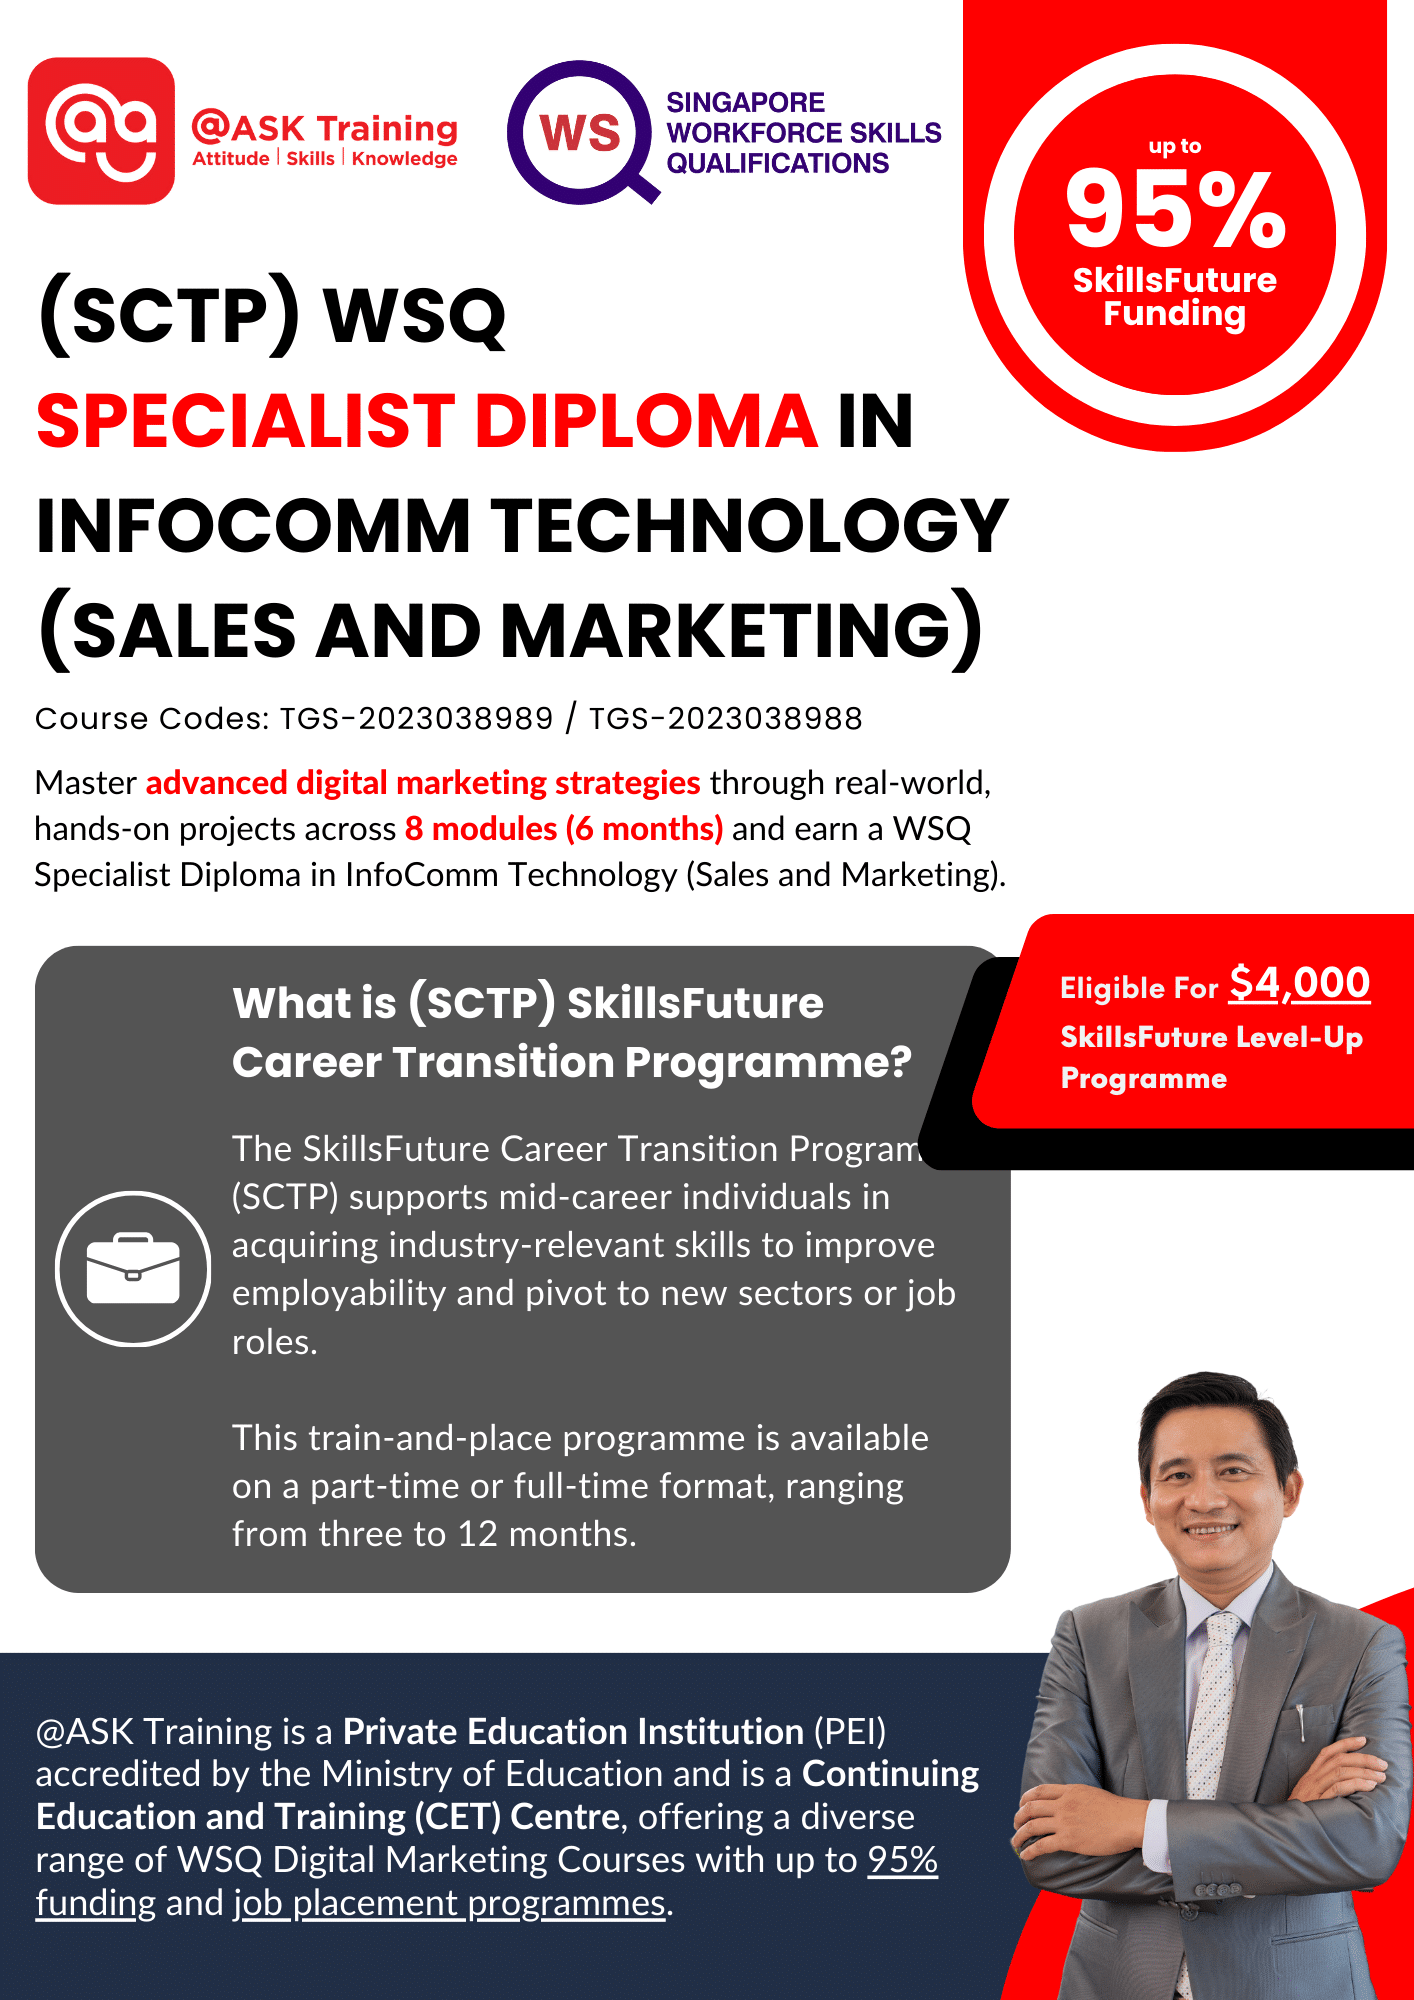 (SCTP) WSQ Specialist Diploma in Infocomm Technology (Sales and Marketing) Course Brochure Cover